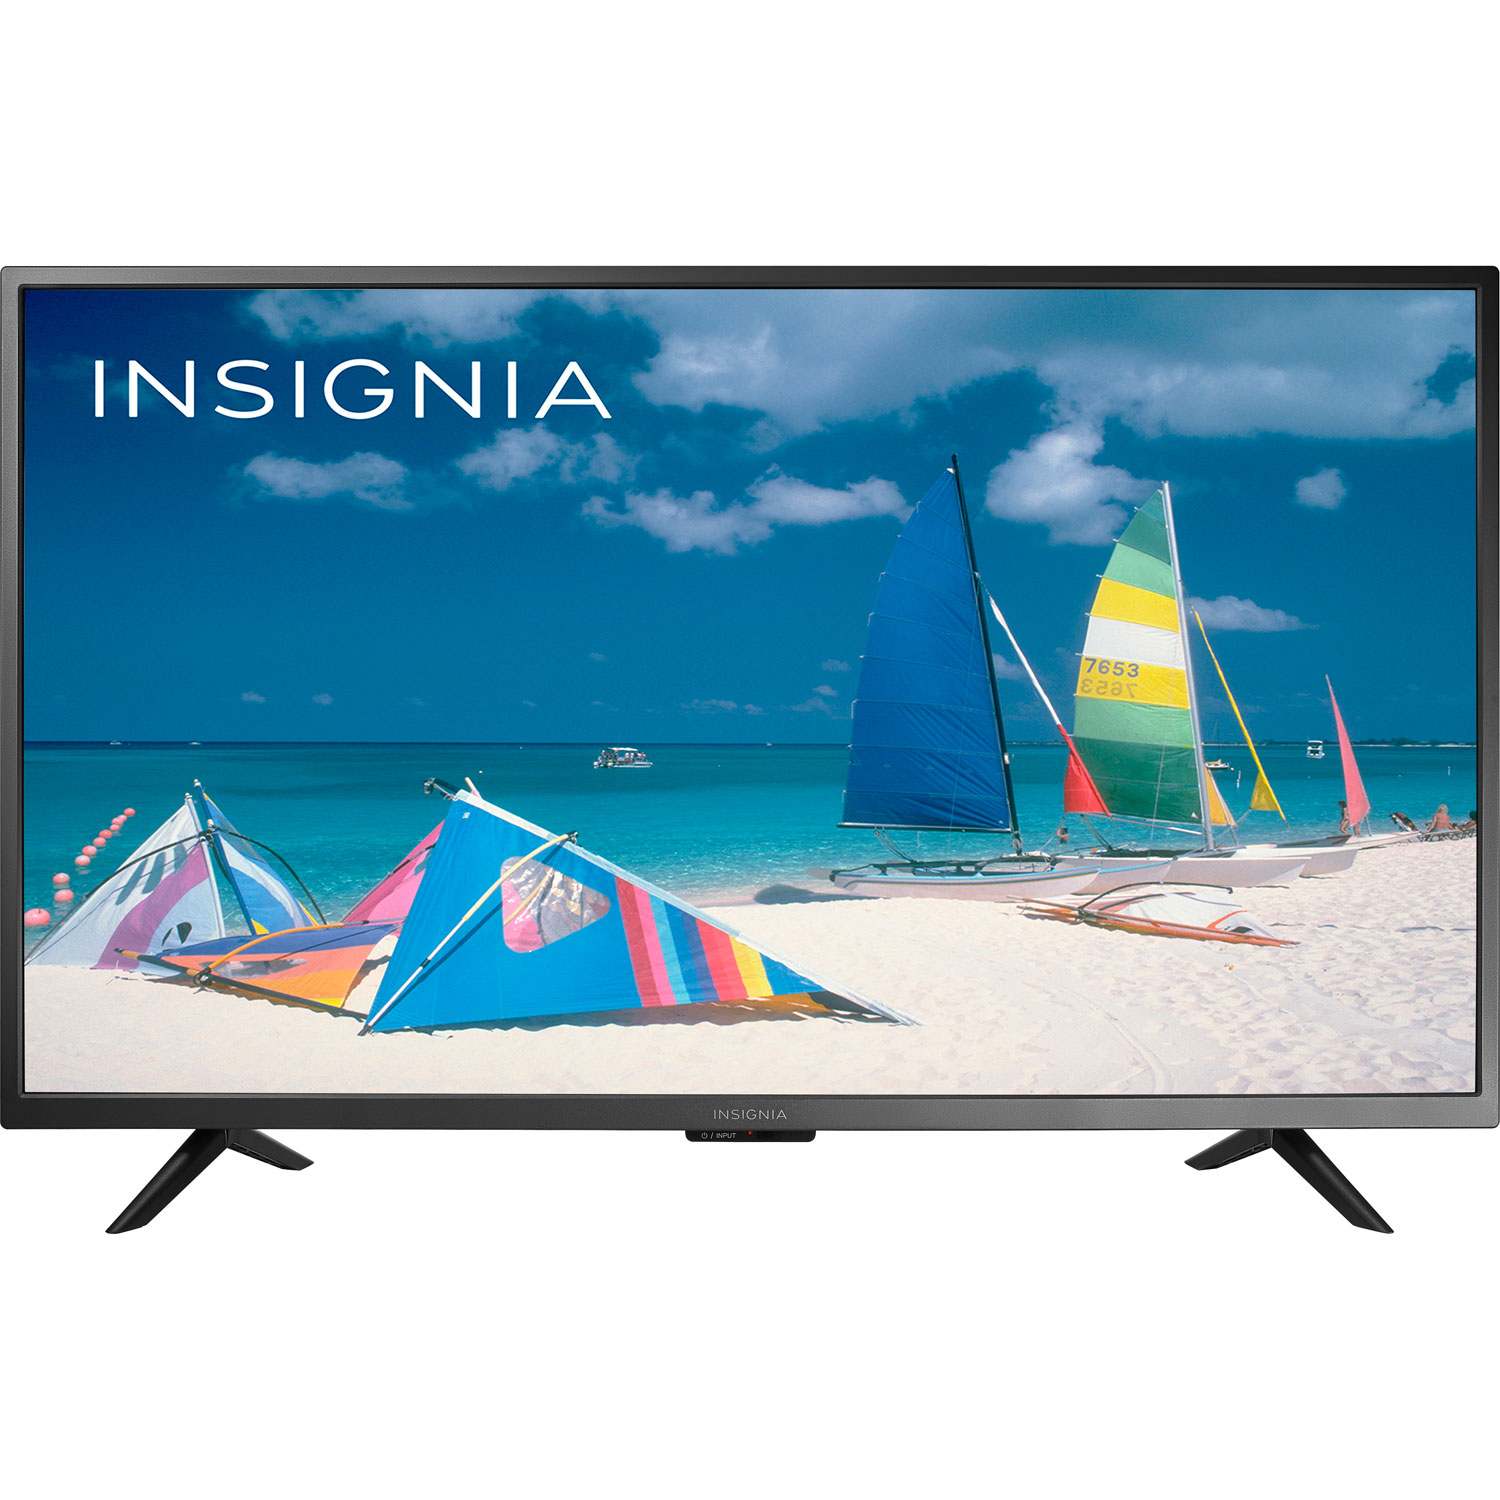 Insignia 40" 1080p LED TV (NS-40D510CA21) - 2020 - Only at Best Buy